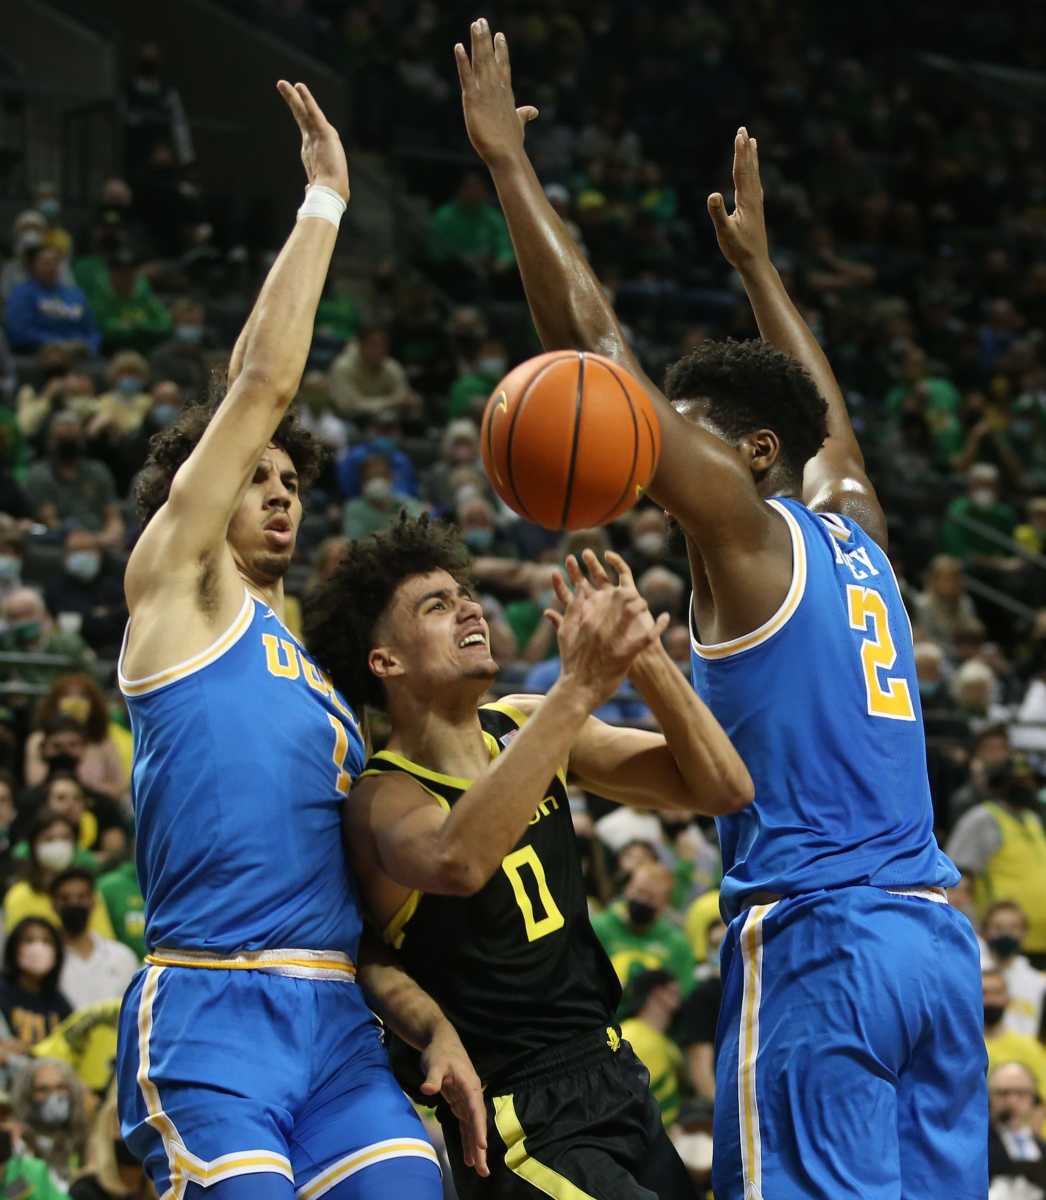 Oregon's Will Richardson, center, is fouled as he goes to the basket between UCLA's Jules Bernard, left, and Cody Riley, right, during the second half Feb. 24, 2022. Eug 022422 Uombb Ucla 07